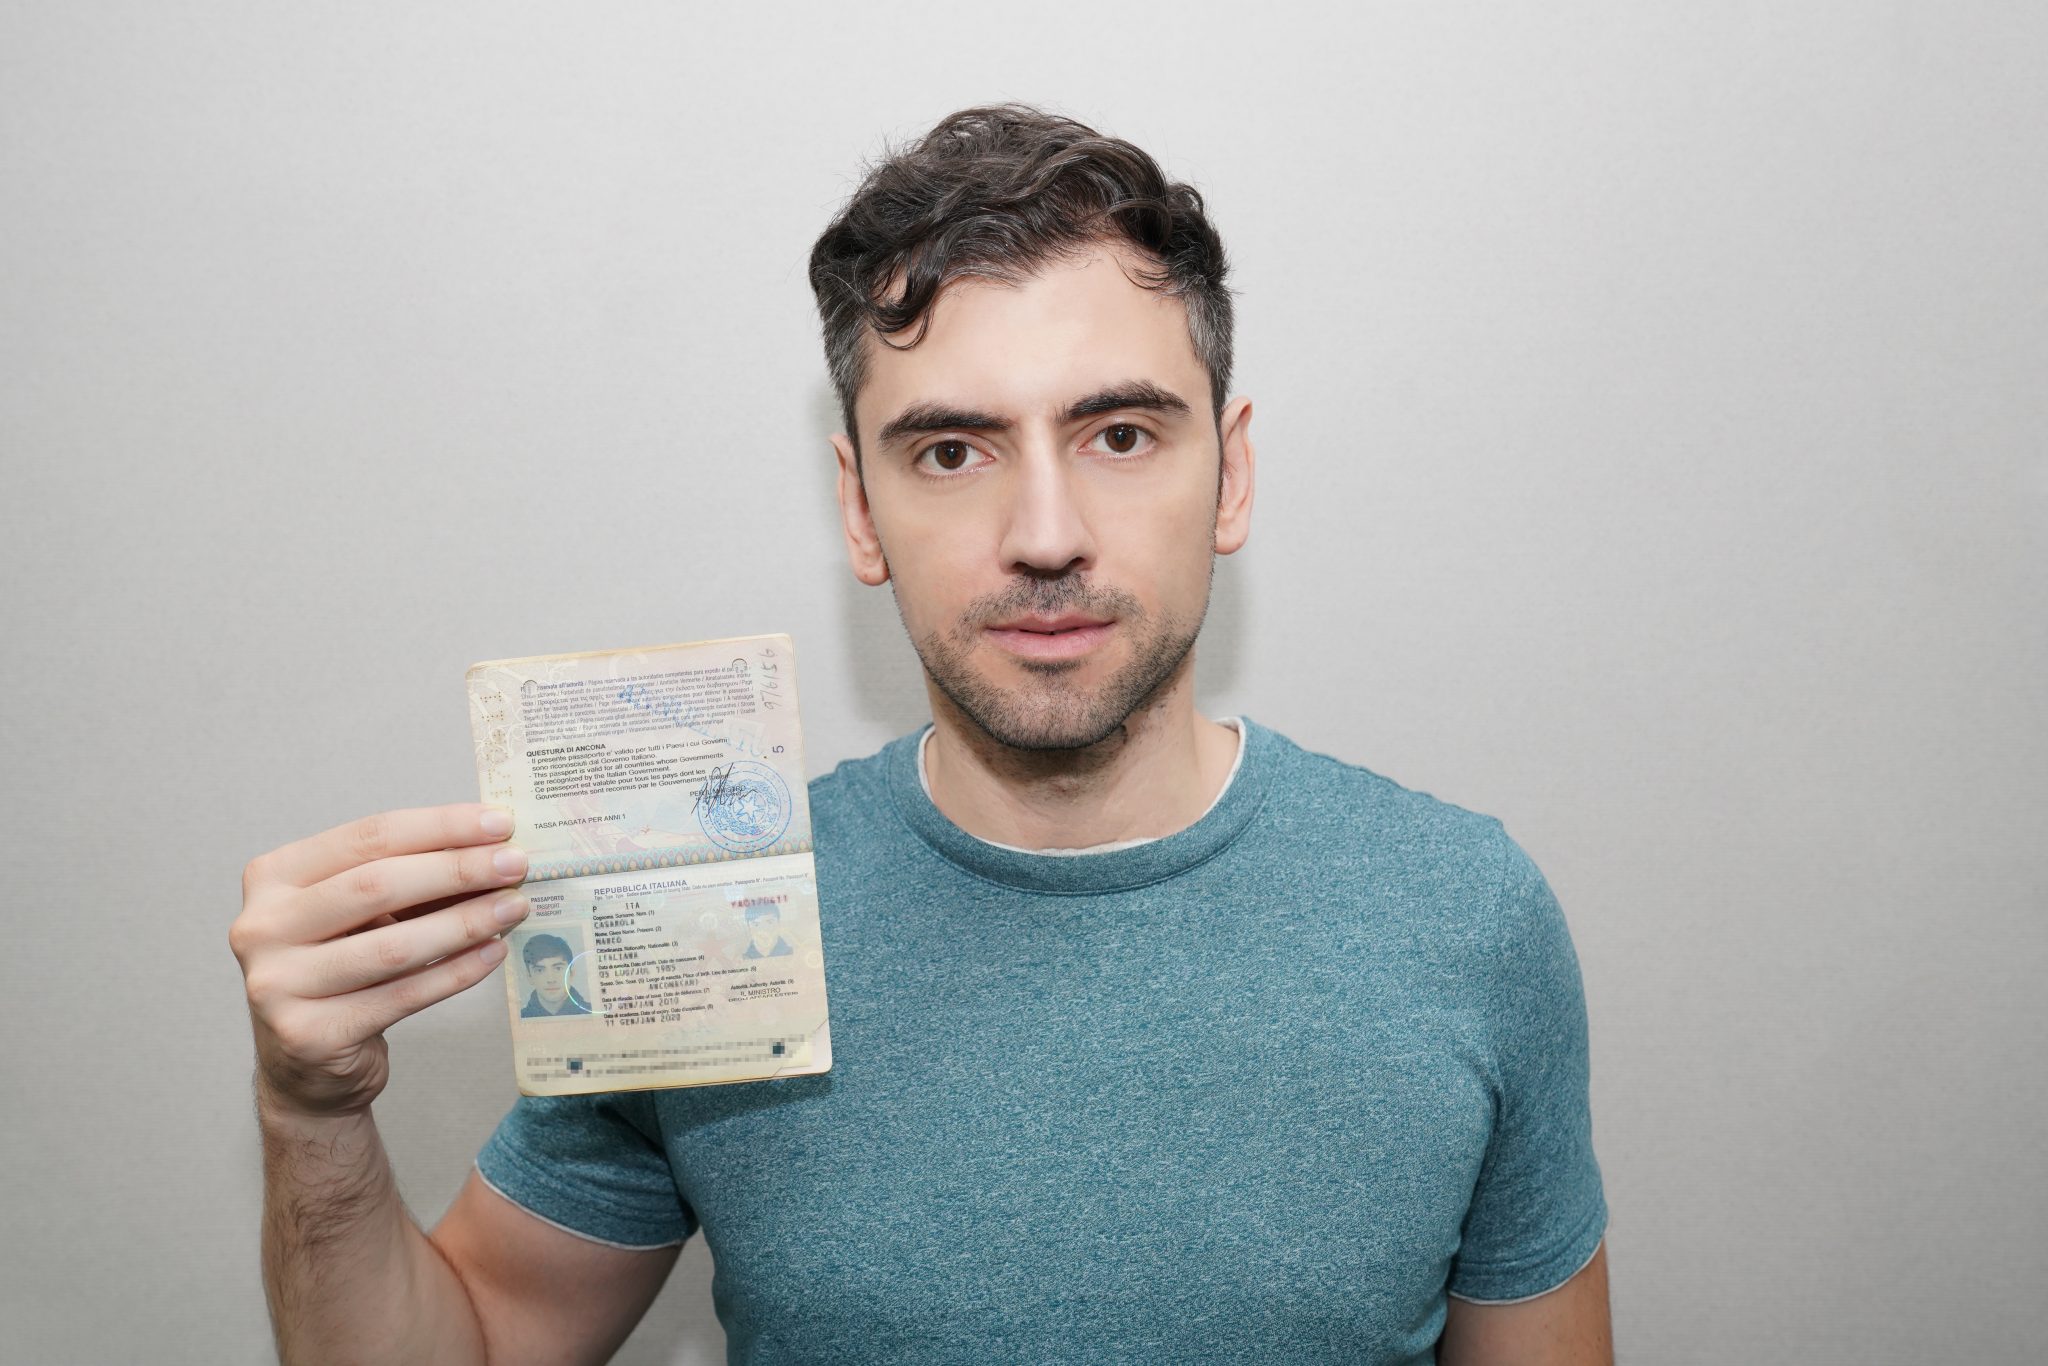 Why Do I Look Bad in Passport Photos?